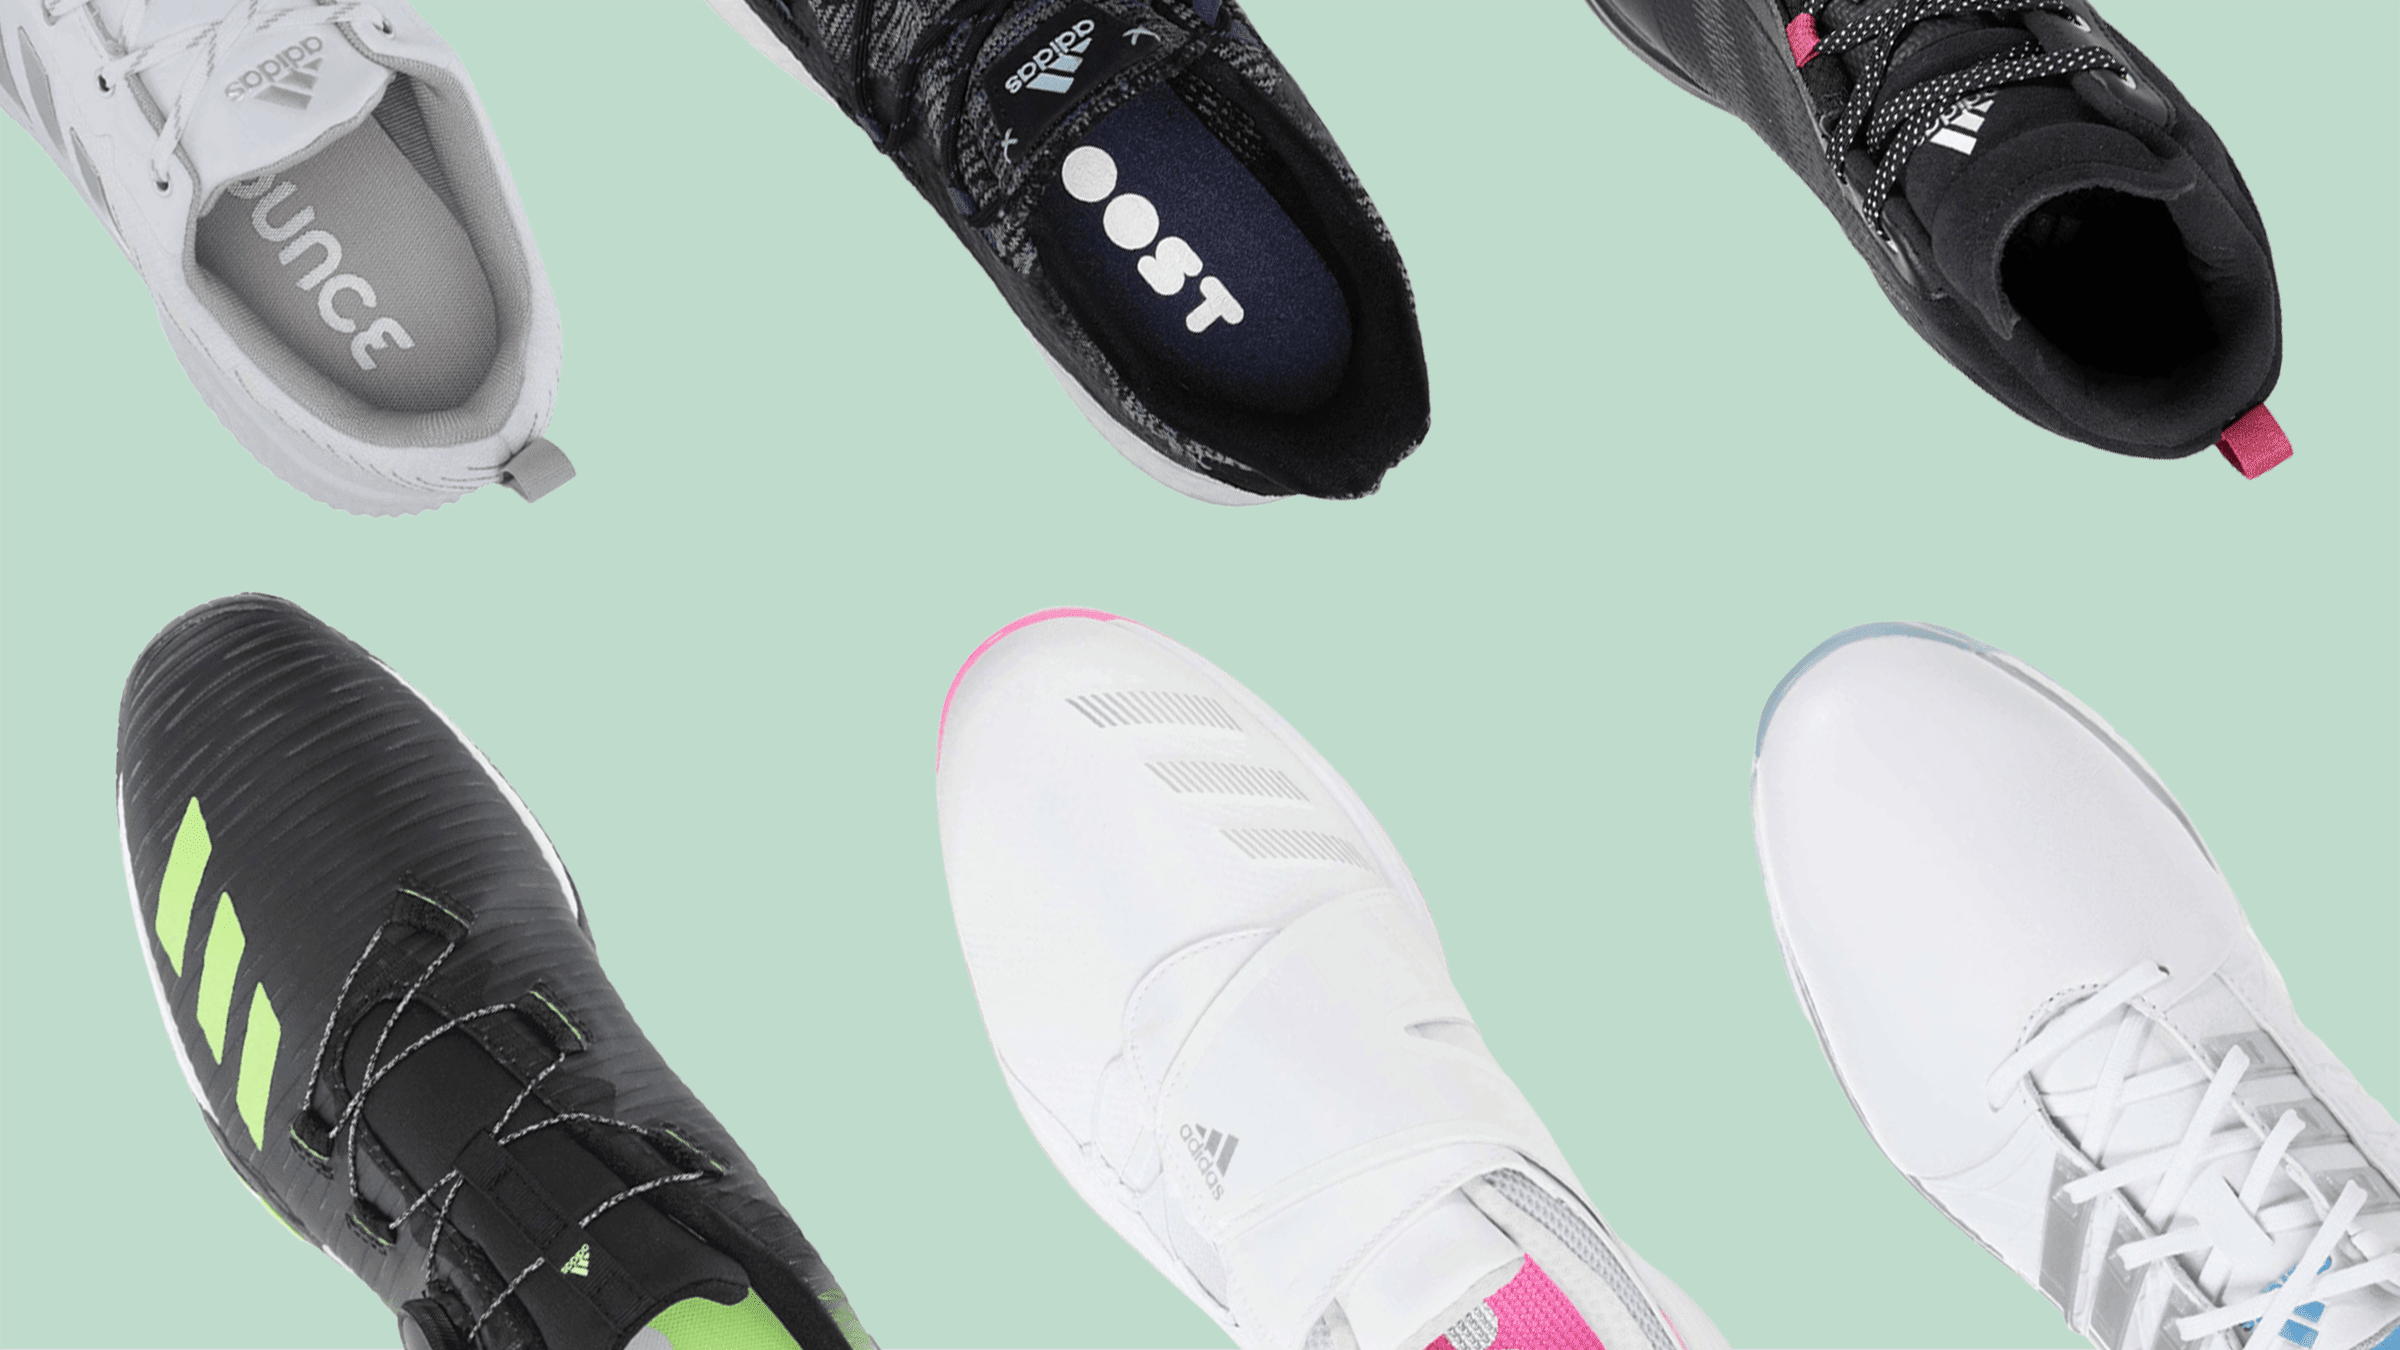 10 Best Adidas Golf Shoes For Women in 2022